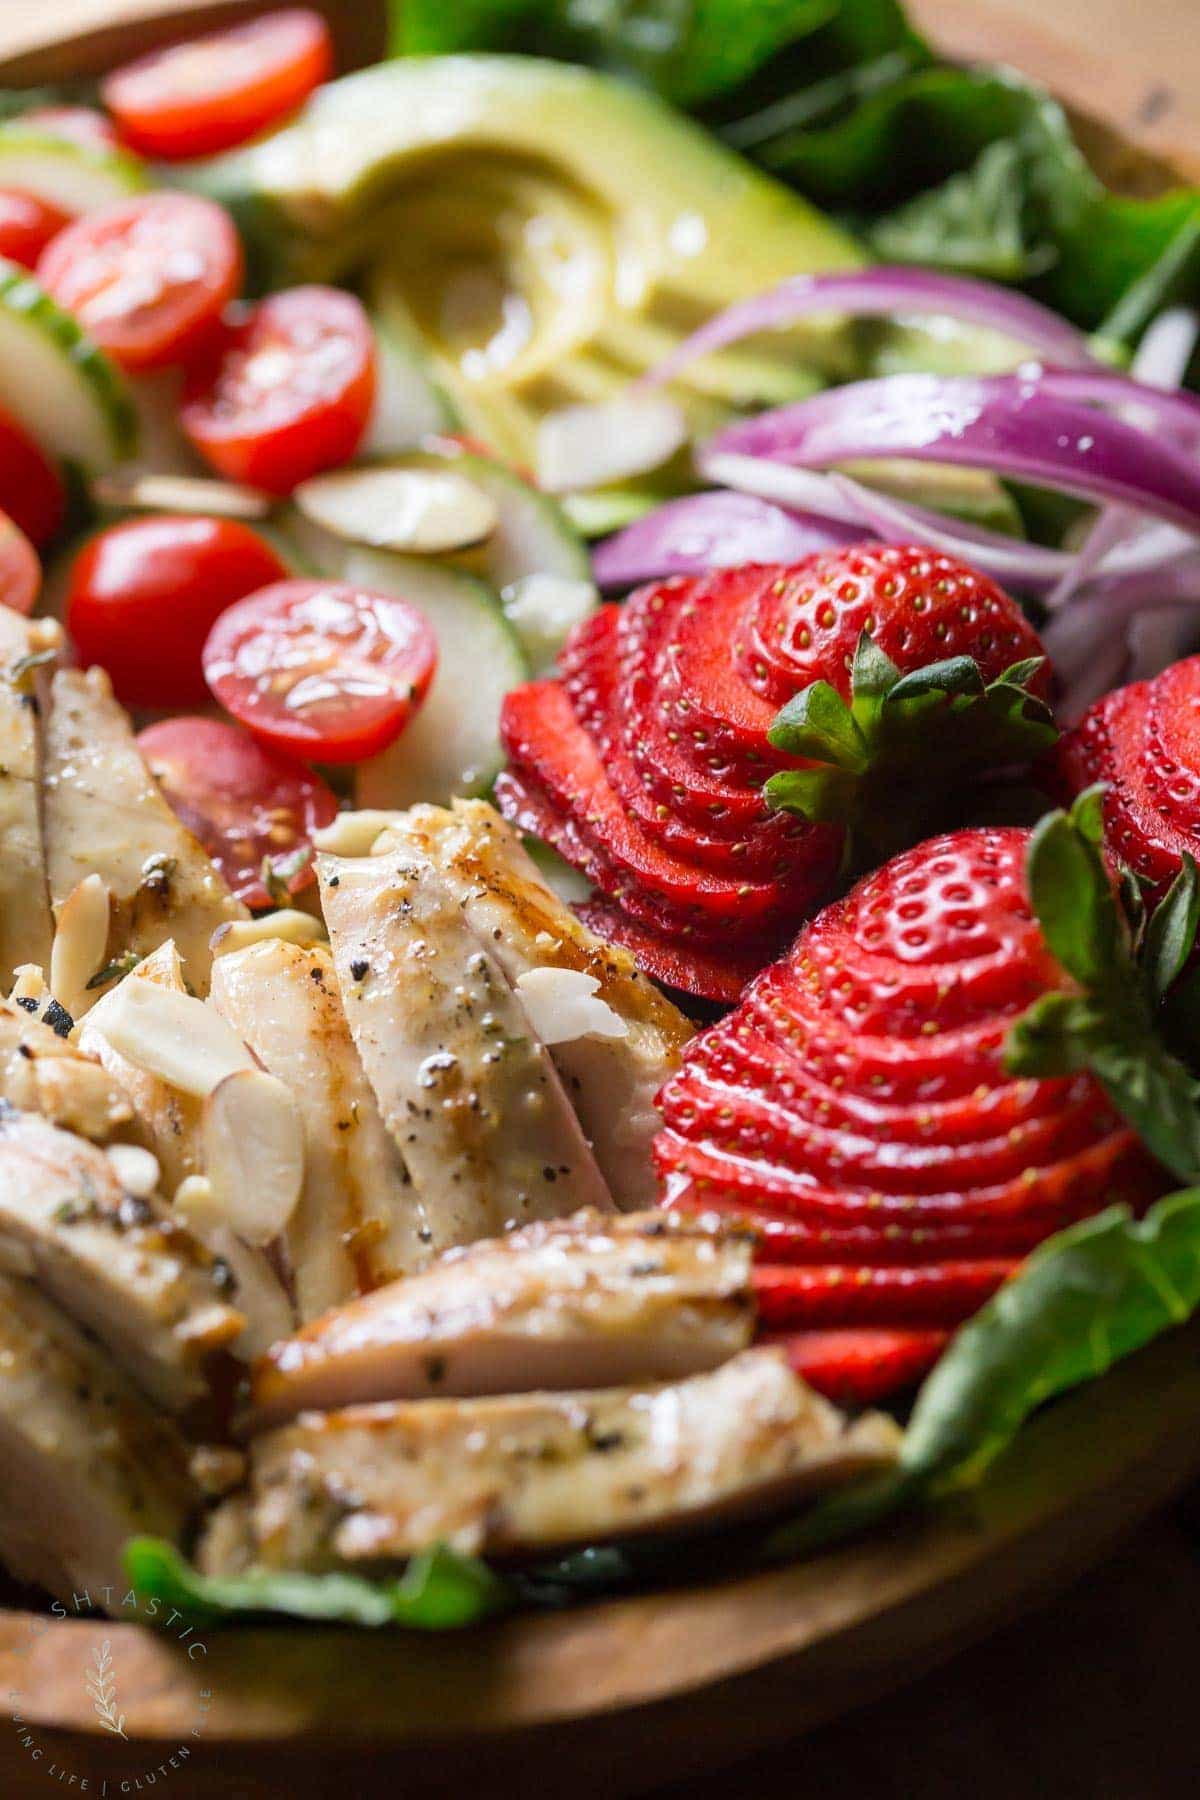  My Grilled Chicken Salad has all sorts of fabulous ingredients including, chicken marinated in garlic and fresh thyme, strawberries, almonds and is topped with an apple cider vinaigrette dressing. | www.noshtastic.com | #grilledchickensalad #chickensalad #grilledchicken #paleochickensalad #paleochicken #paleosalad #glutenfreesalad #glutenfree #noshtastic #glutenfreerecipe